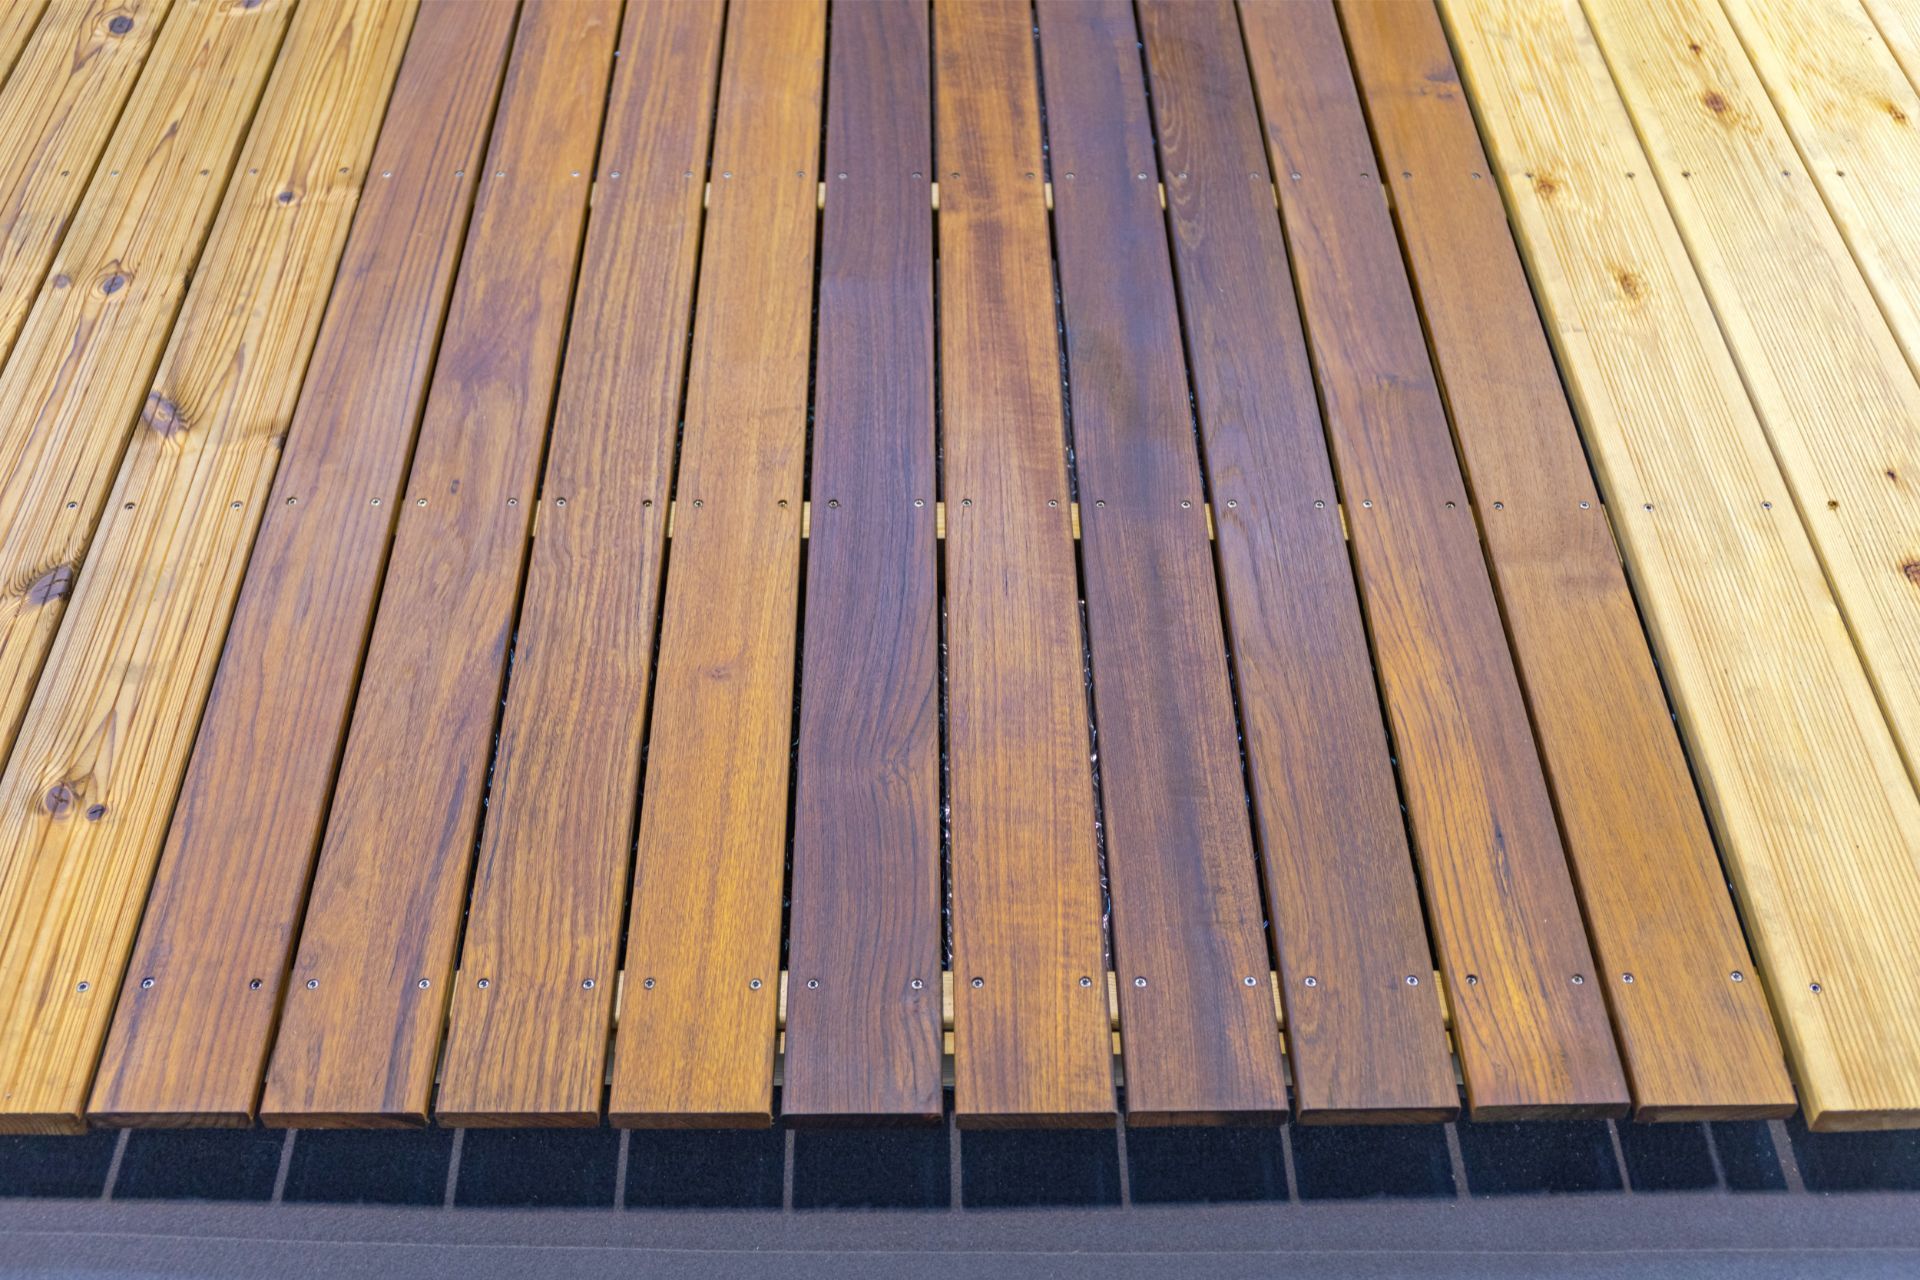 A photo of various wooden deck boards in Athens, GA. THe deck boards are local wood types that can be found in Athens, GA